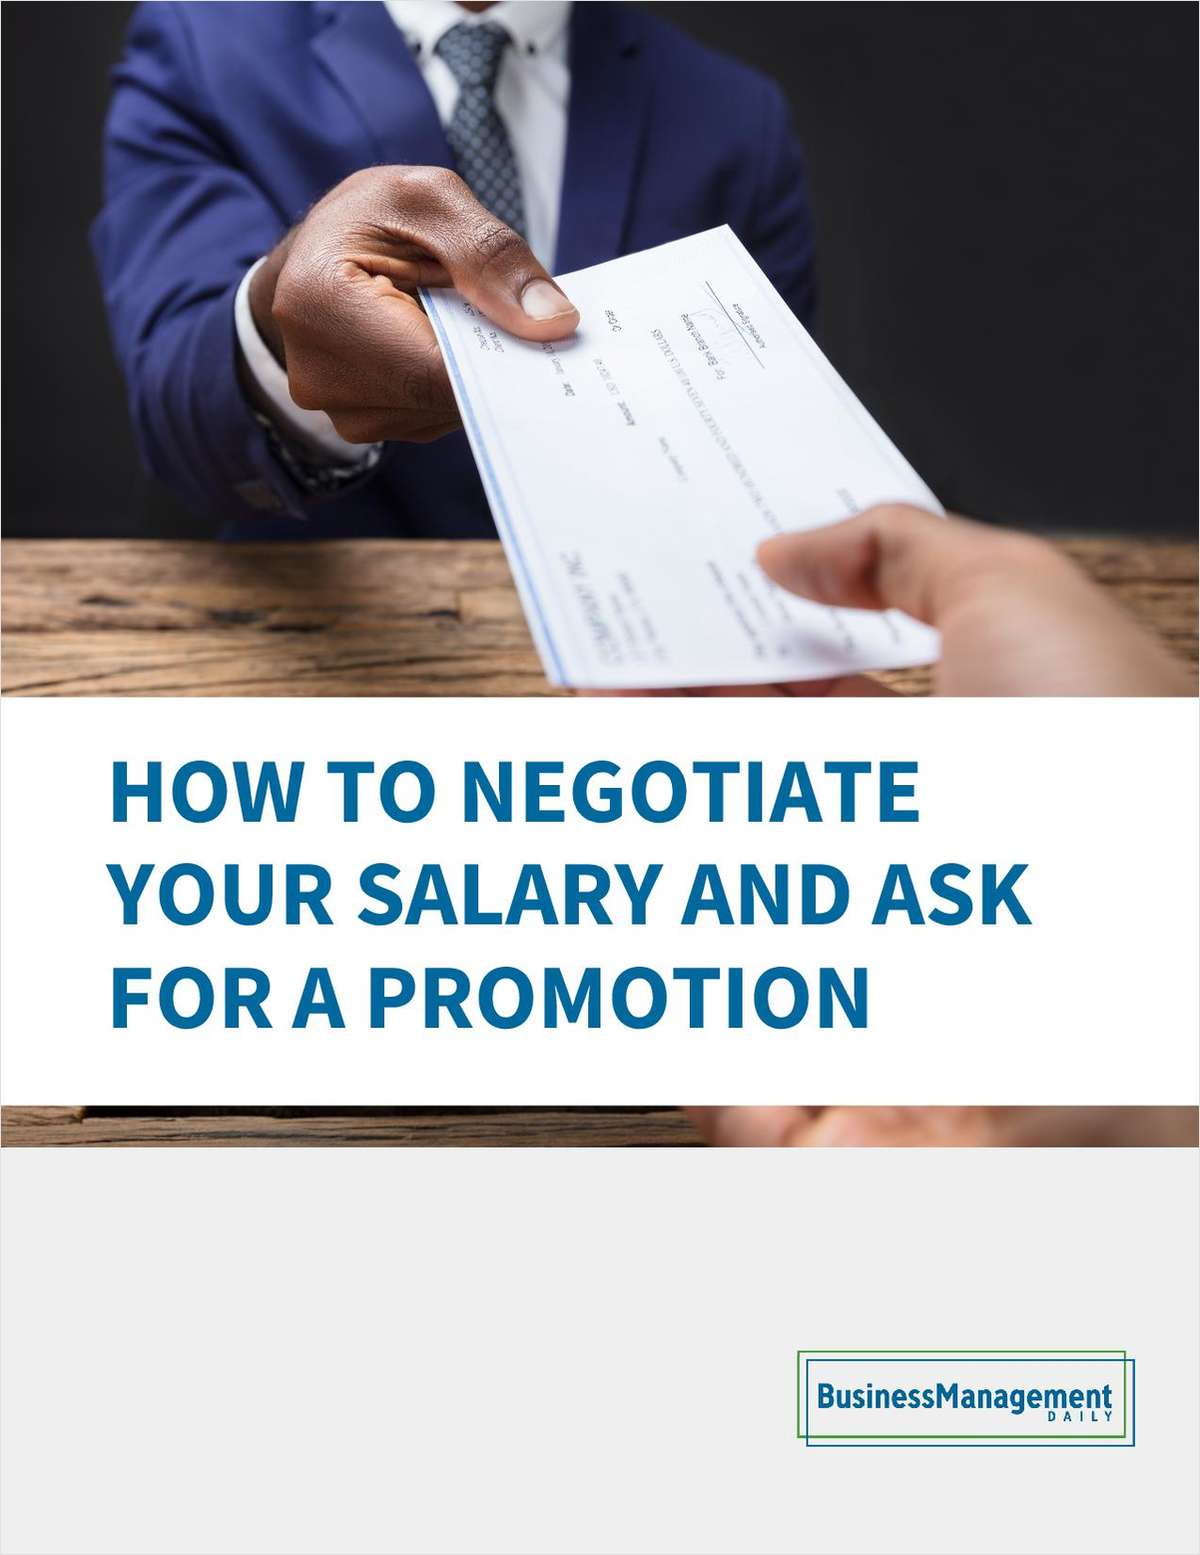 How To Negotiate Your Salary And Ask For A Promotion